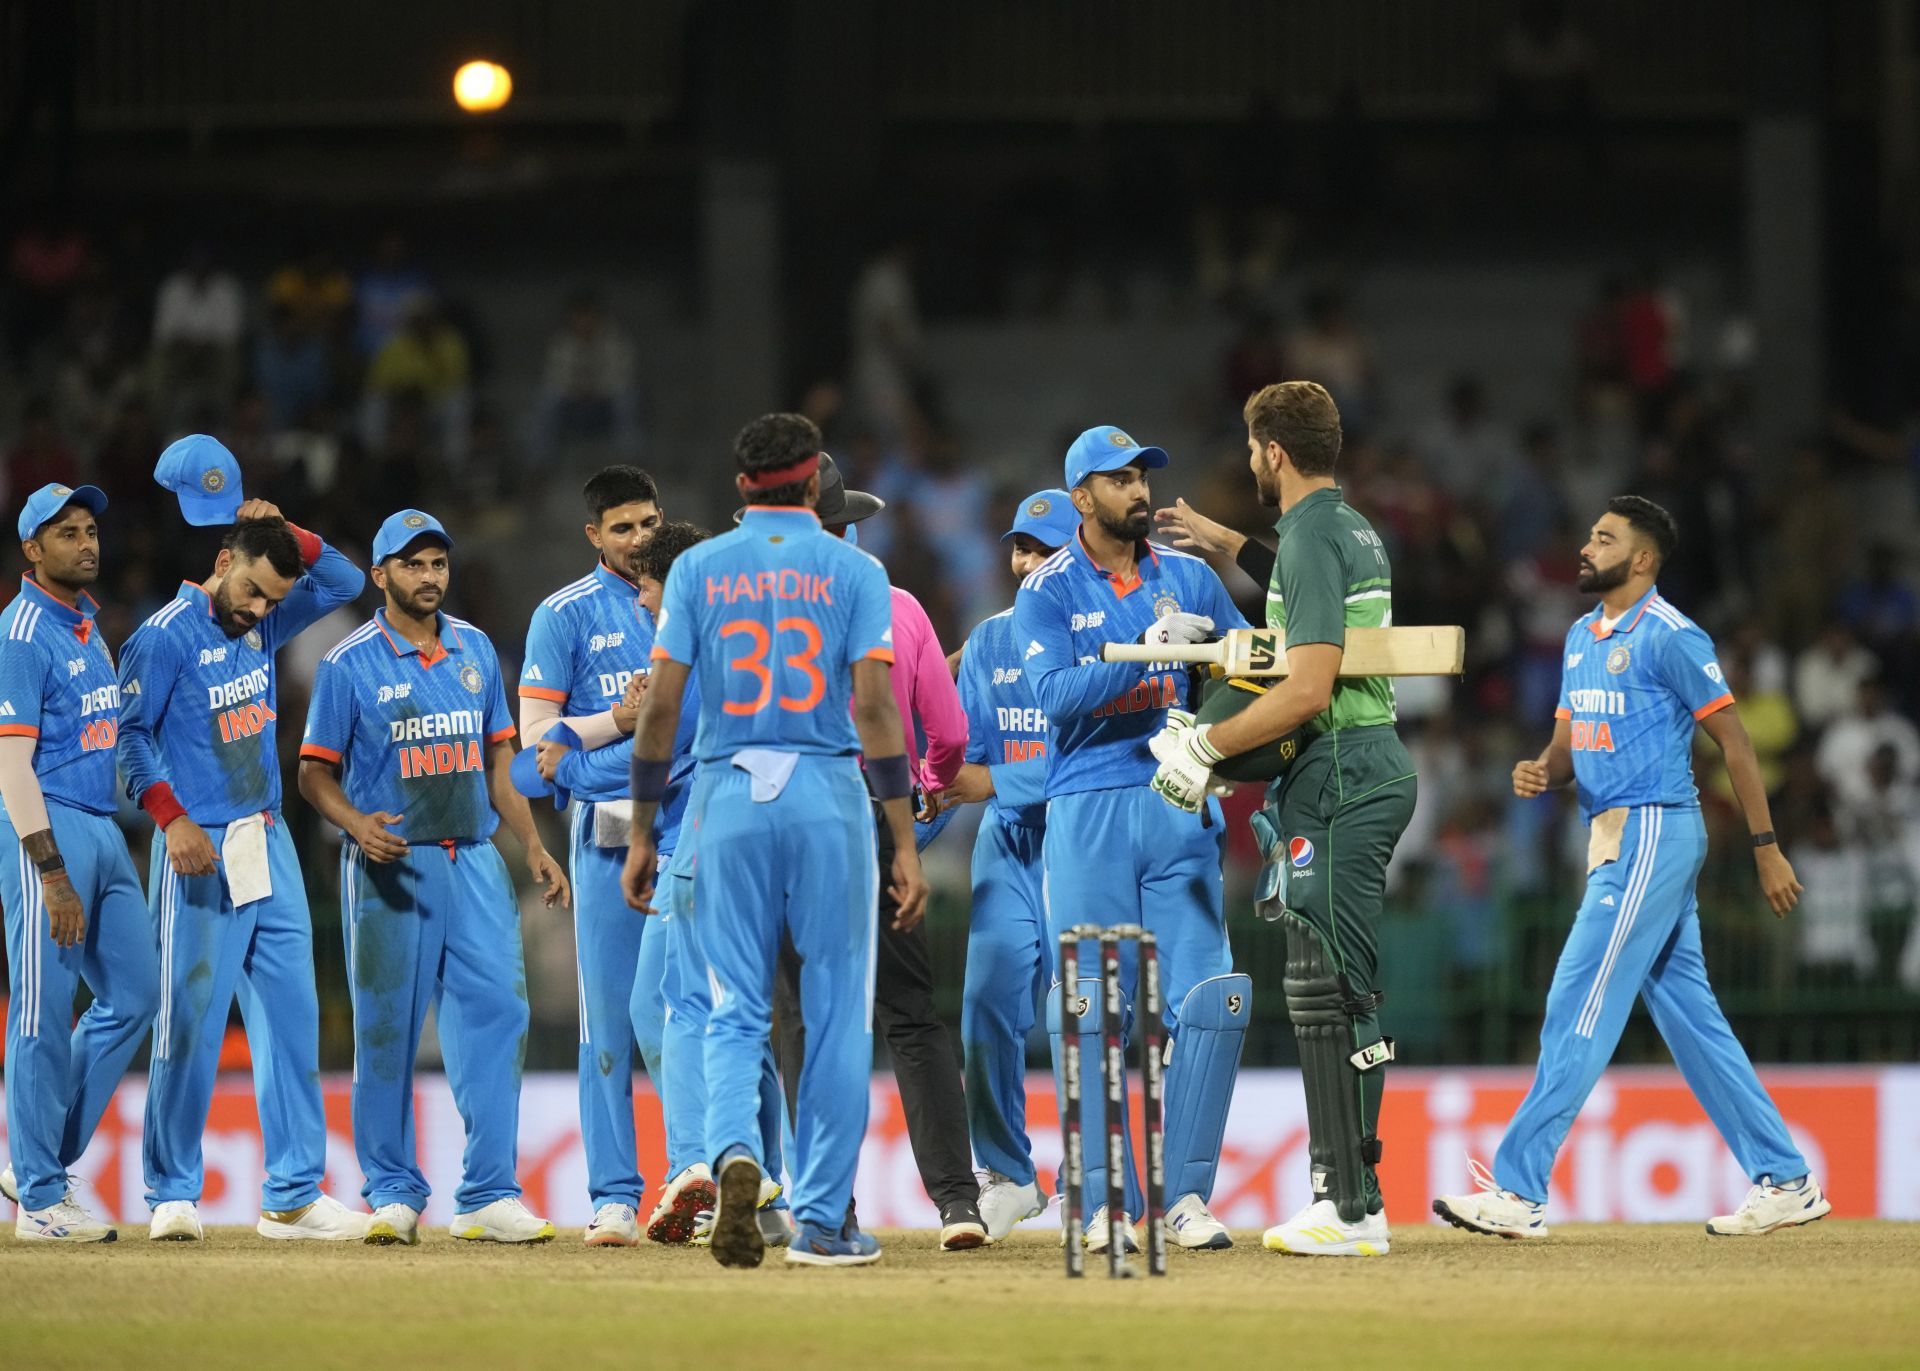 India thrashed Pakistan by 228 runs in their first Super Four game. [P/C: AP]